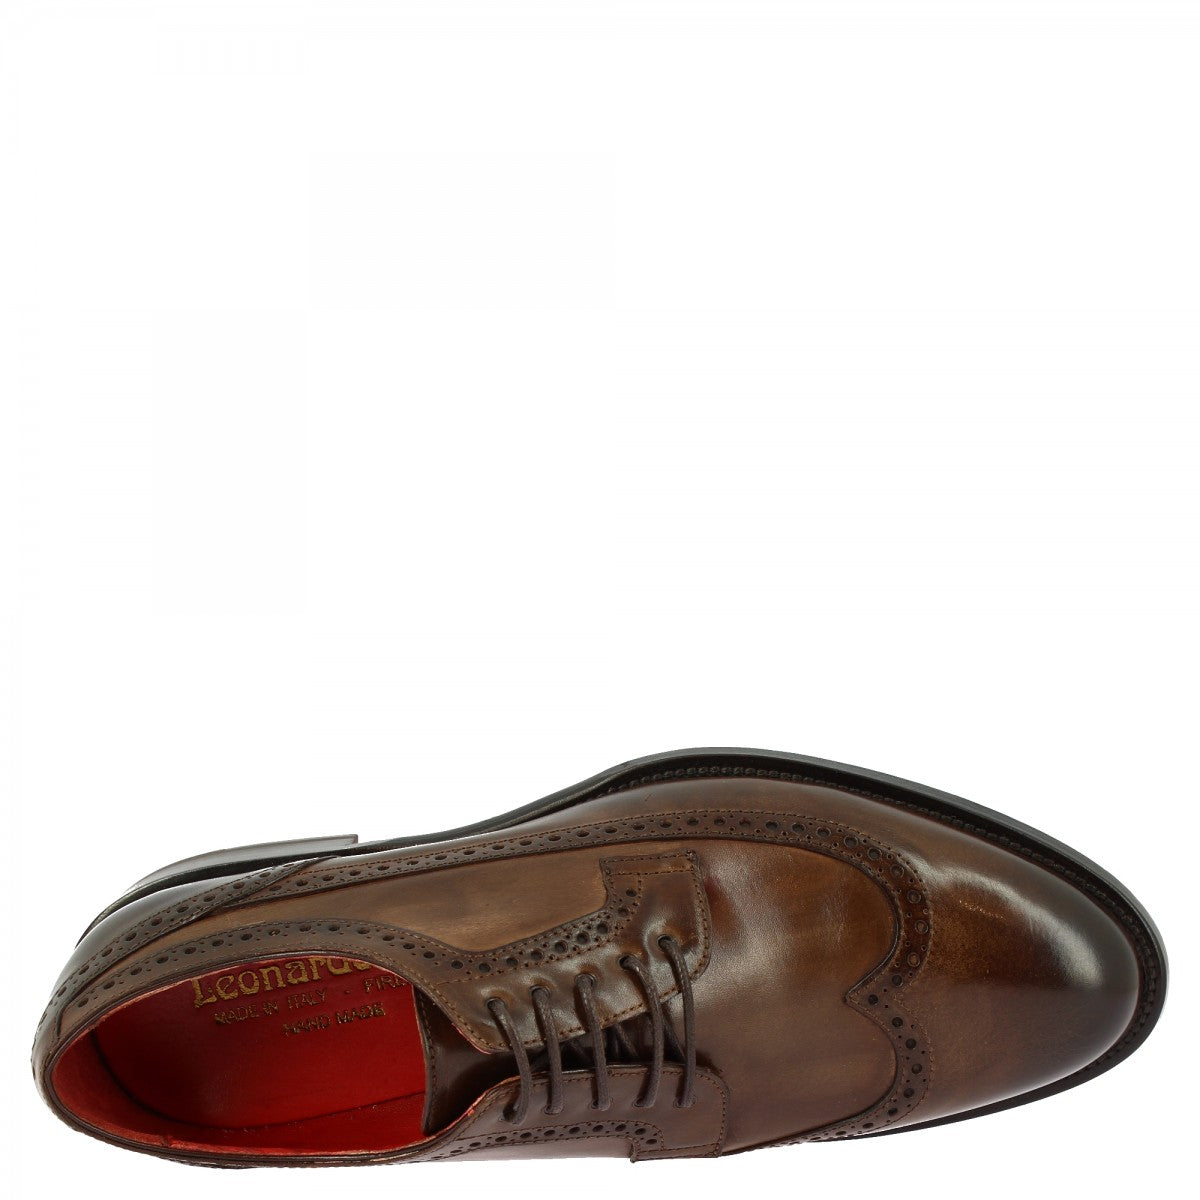 Men's handmade lace-up half brogues shoes in dark brown calf leather